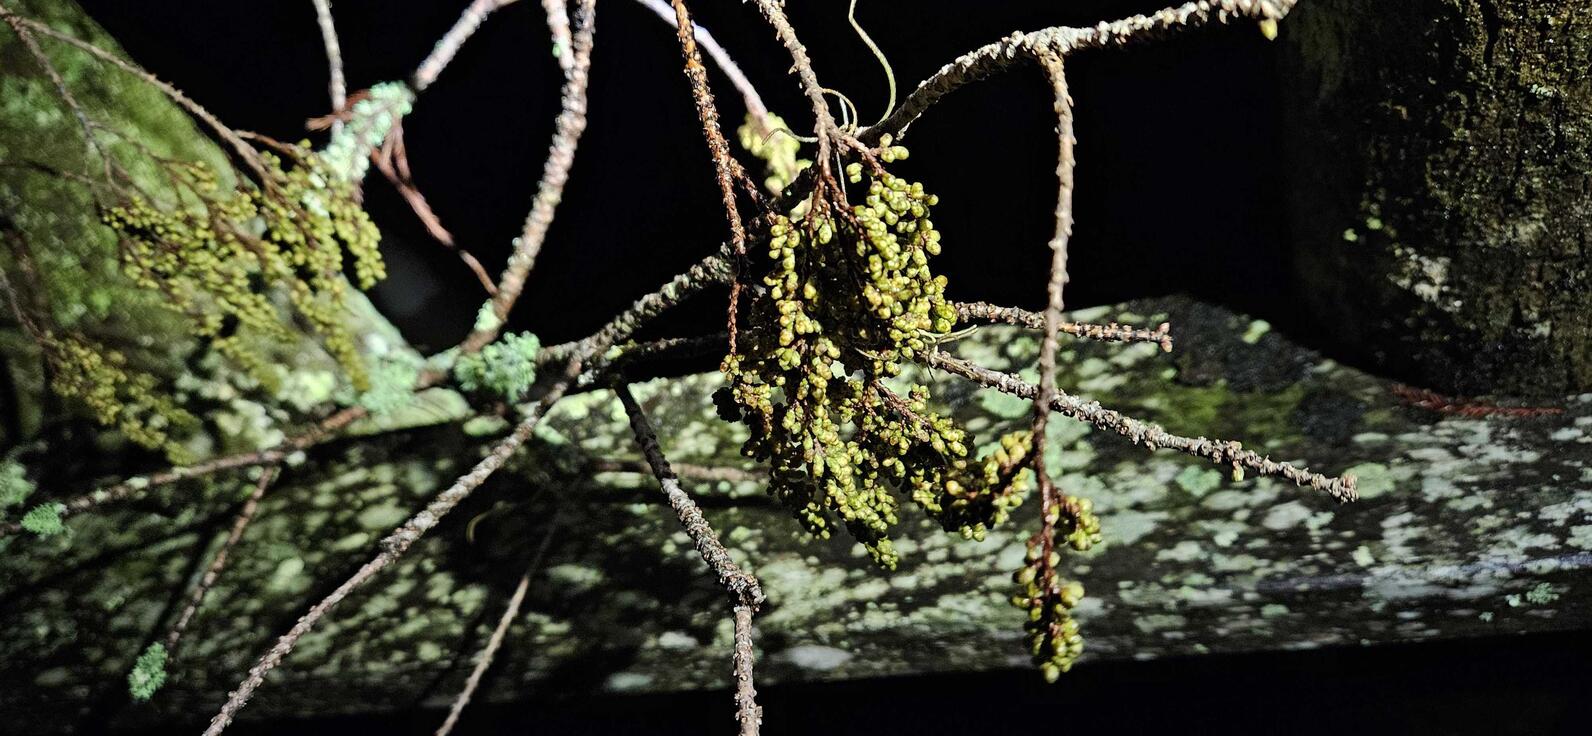 Clumps of small, green nodules descend vertically from thin cypress sticks, these are catkins, essentially the pollen producing part of a cypress tree.